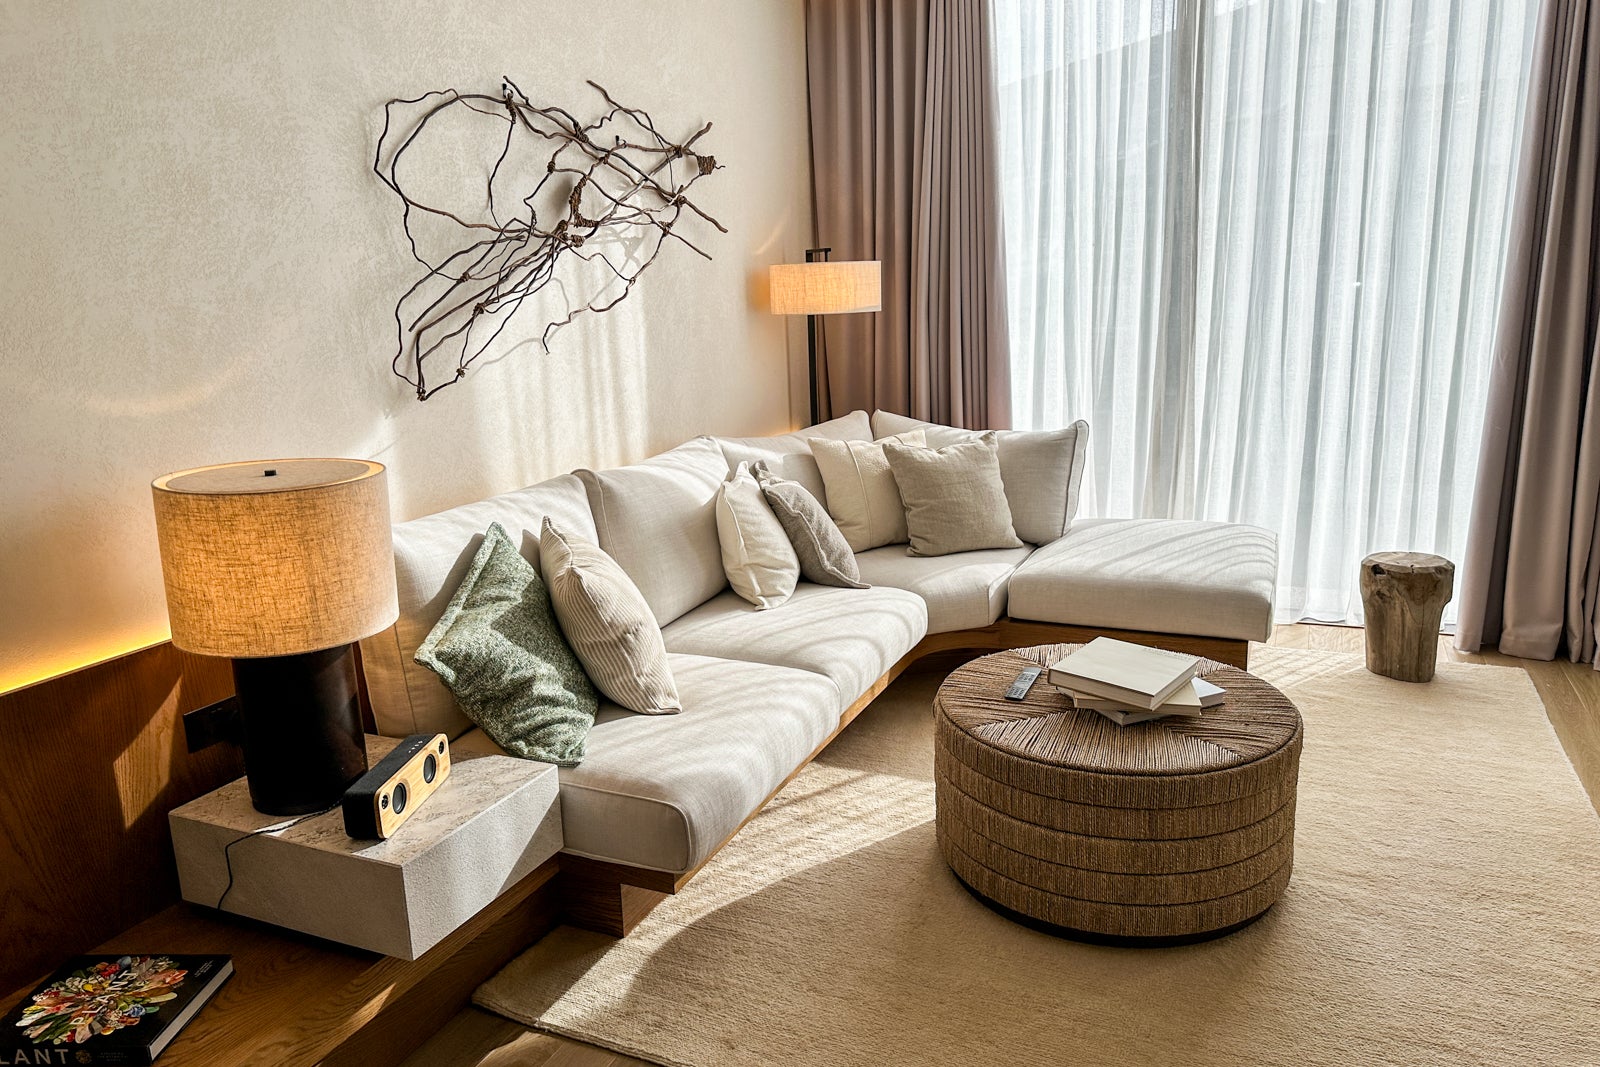 Stylish and sustainable: What it is like staying at London’s 1 Resort Mayfair